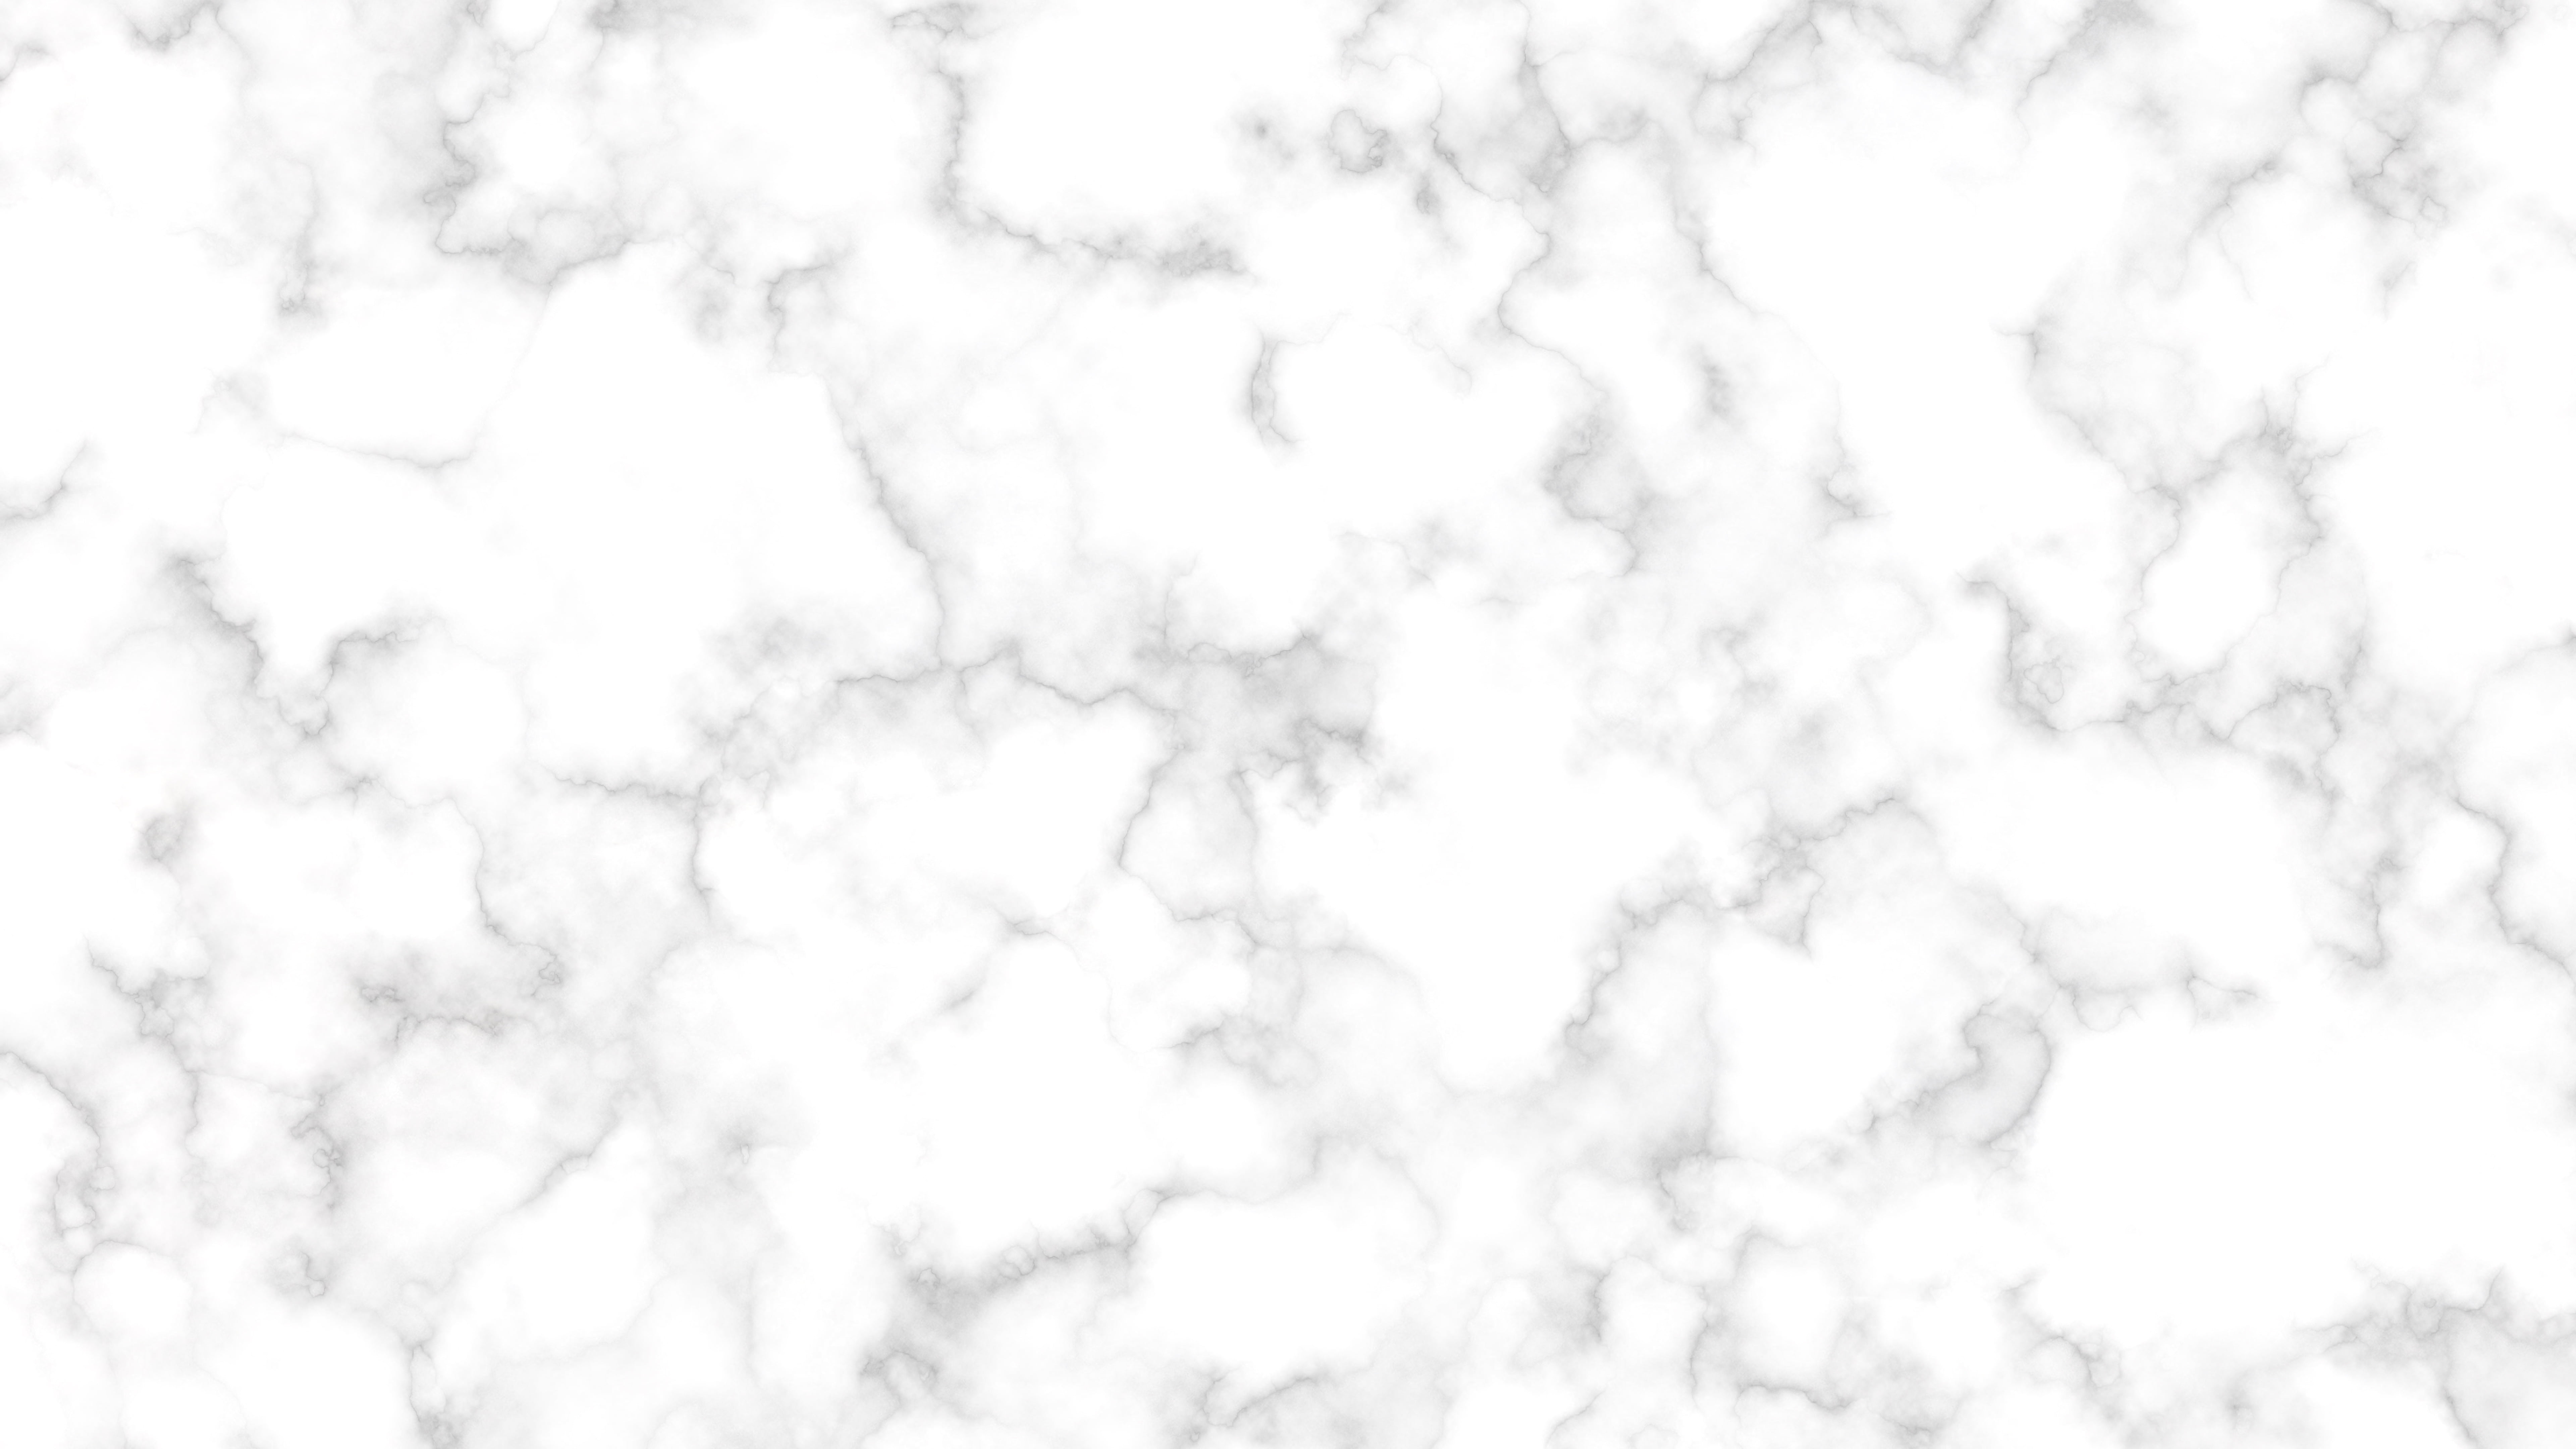 Grey and White Marble Bathroom, surface, granite, tile, textured